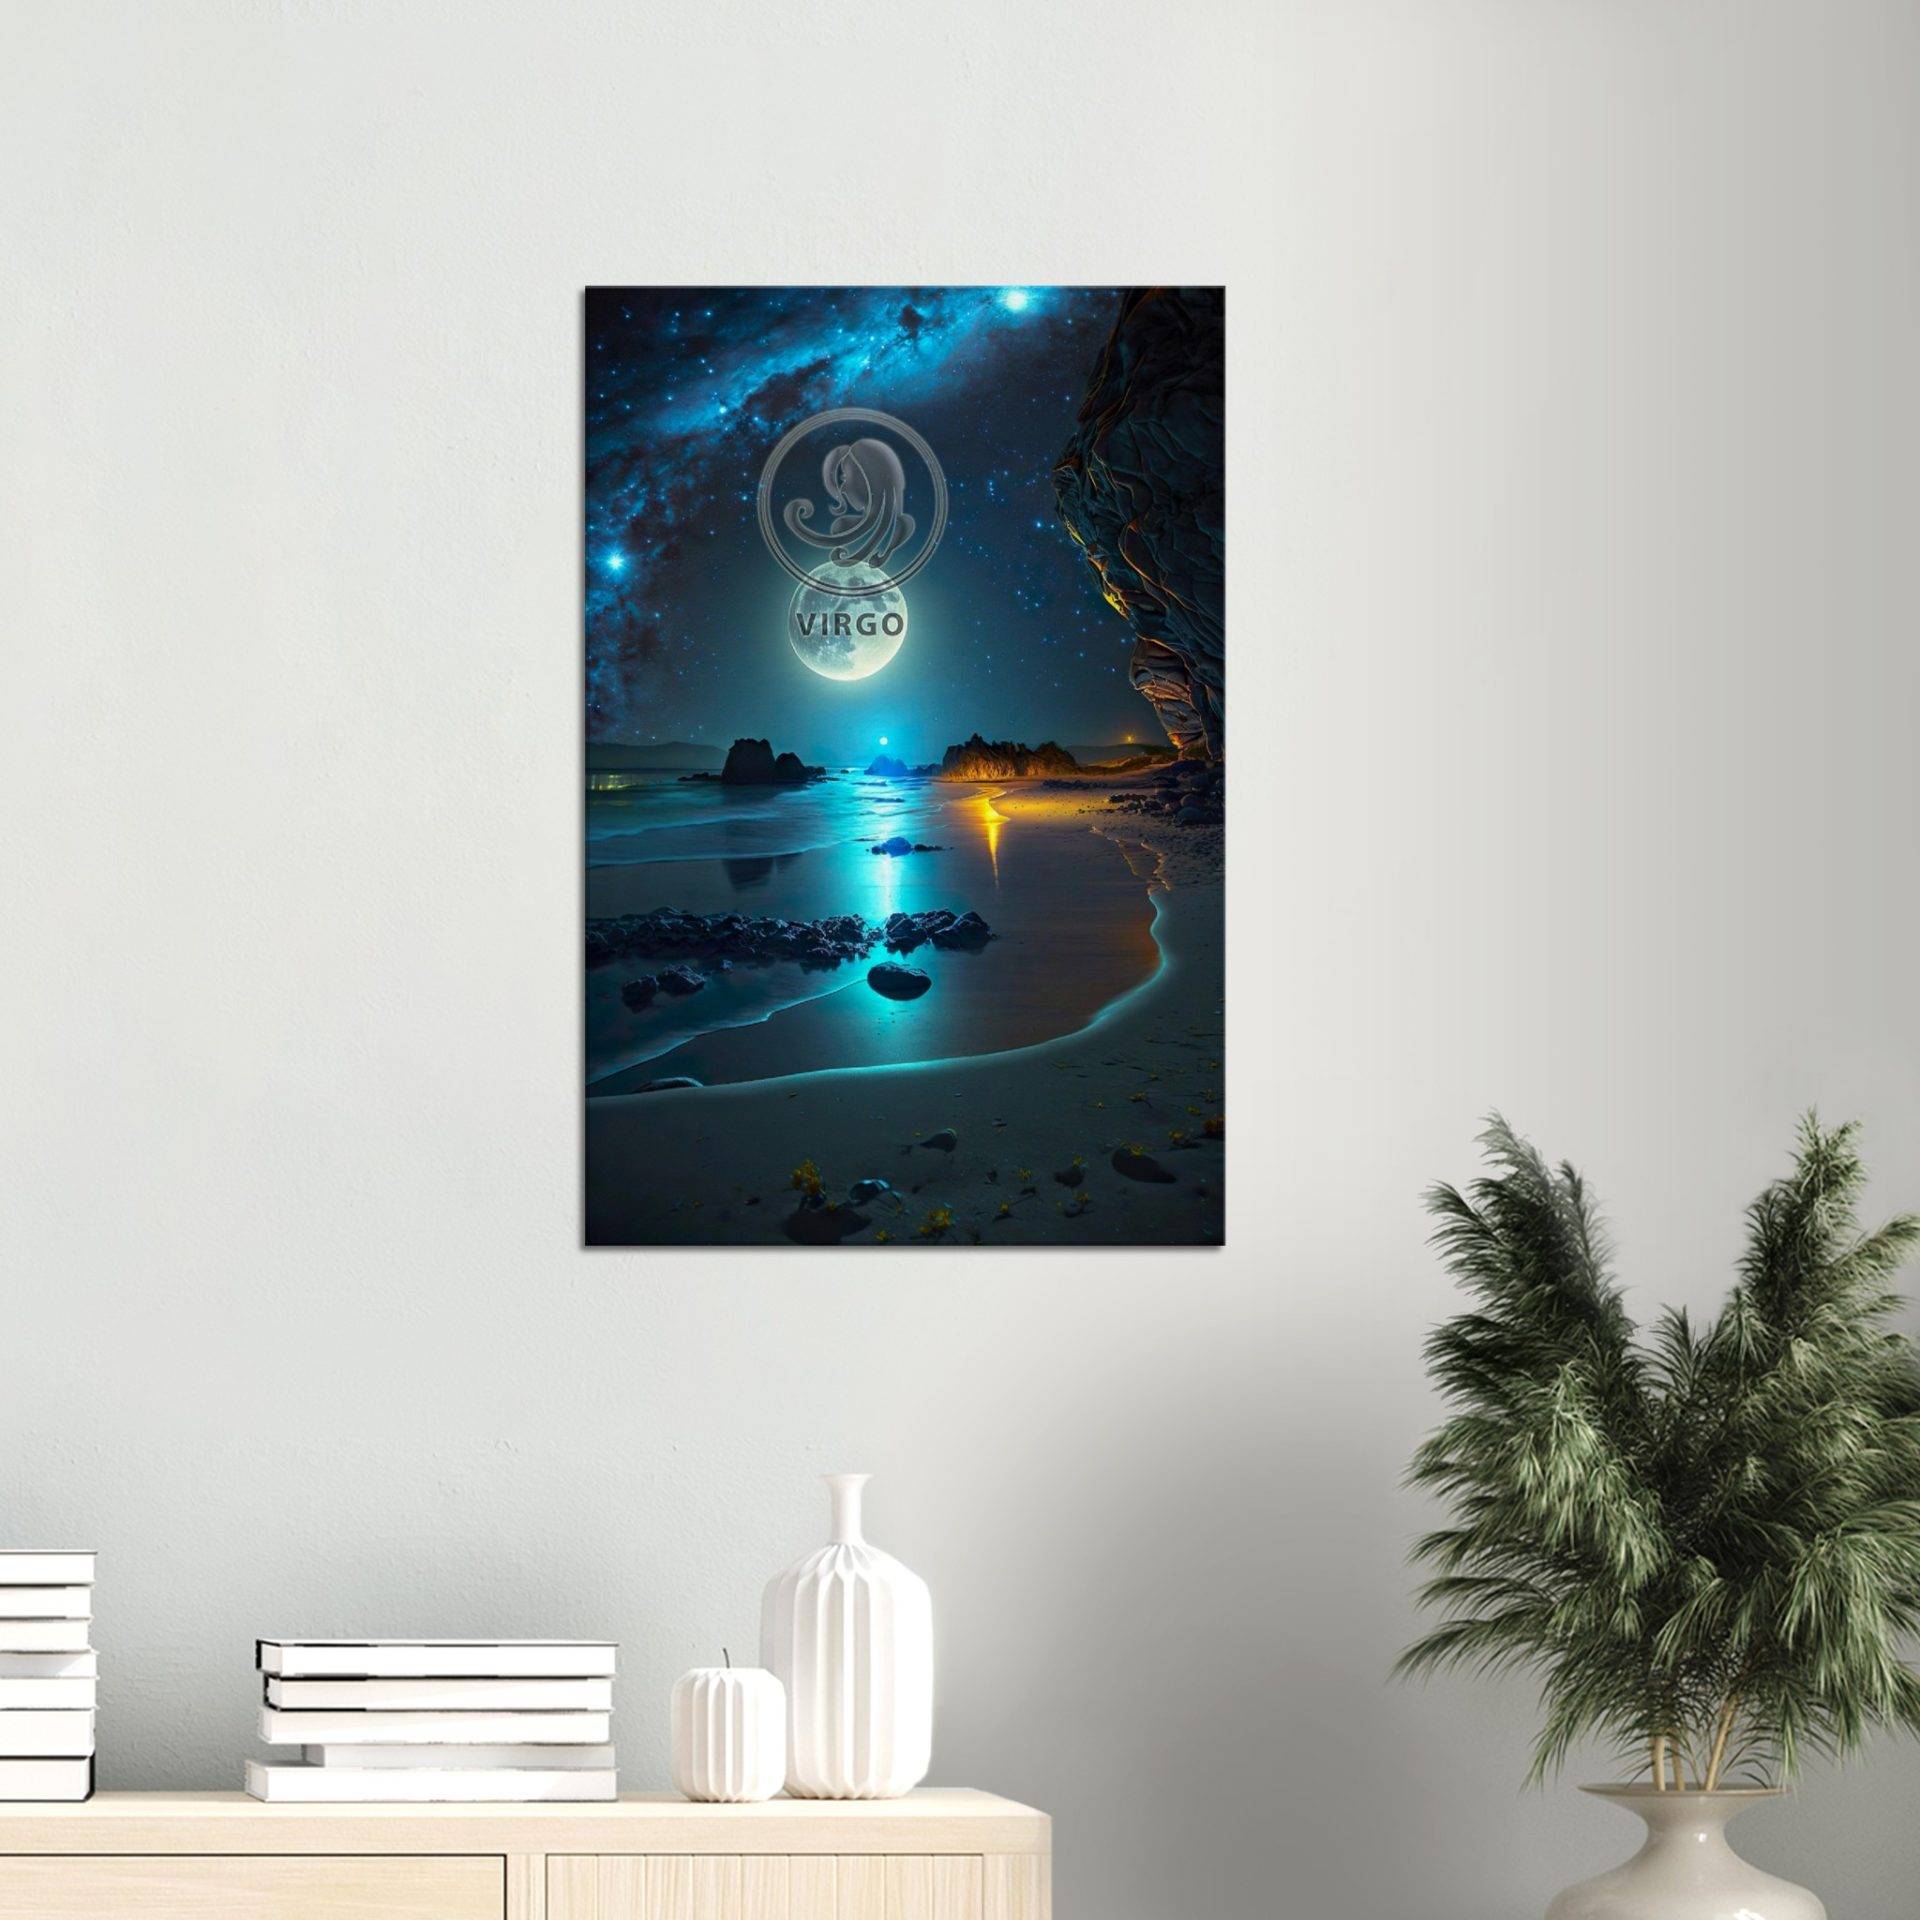 Moon with Virgo (Canvas Print) Fabled Gallery https://fabledgallery.art/?post_type=product&p=37078